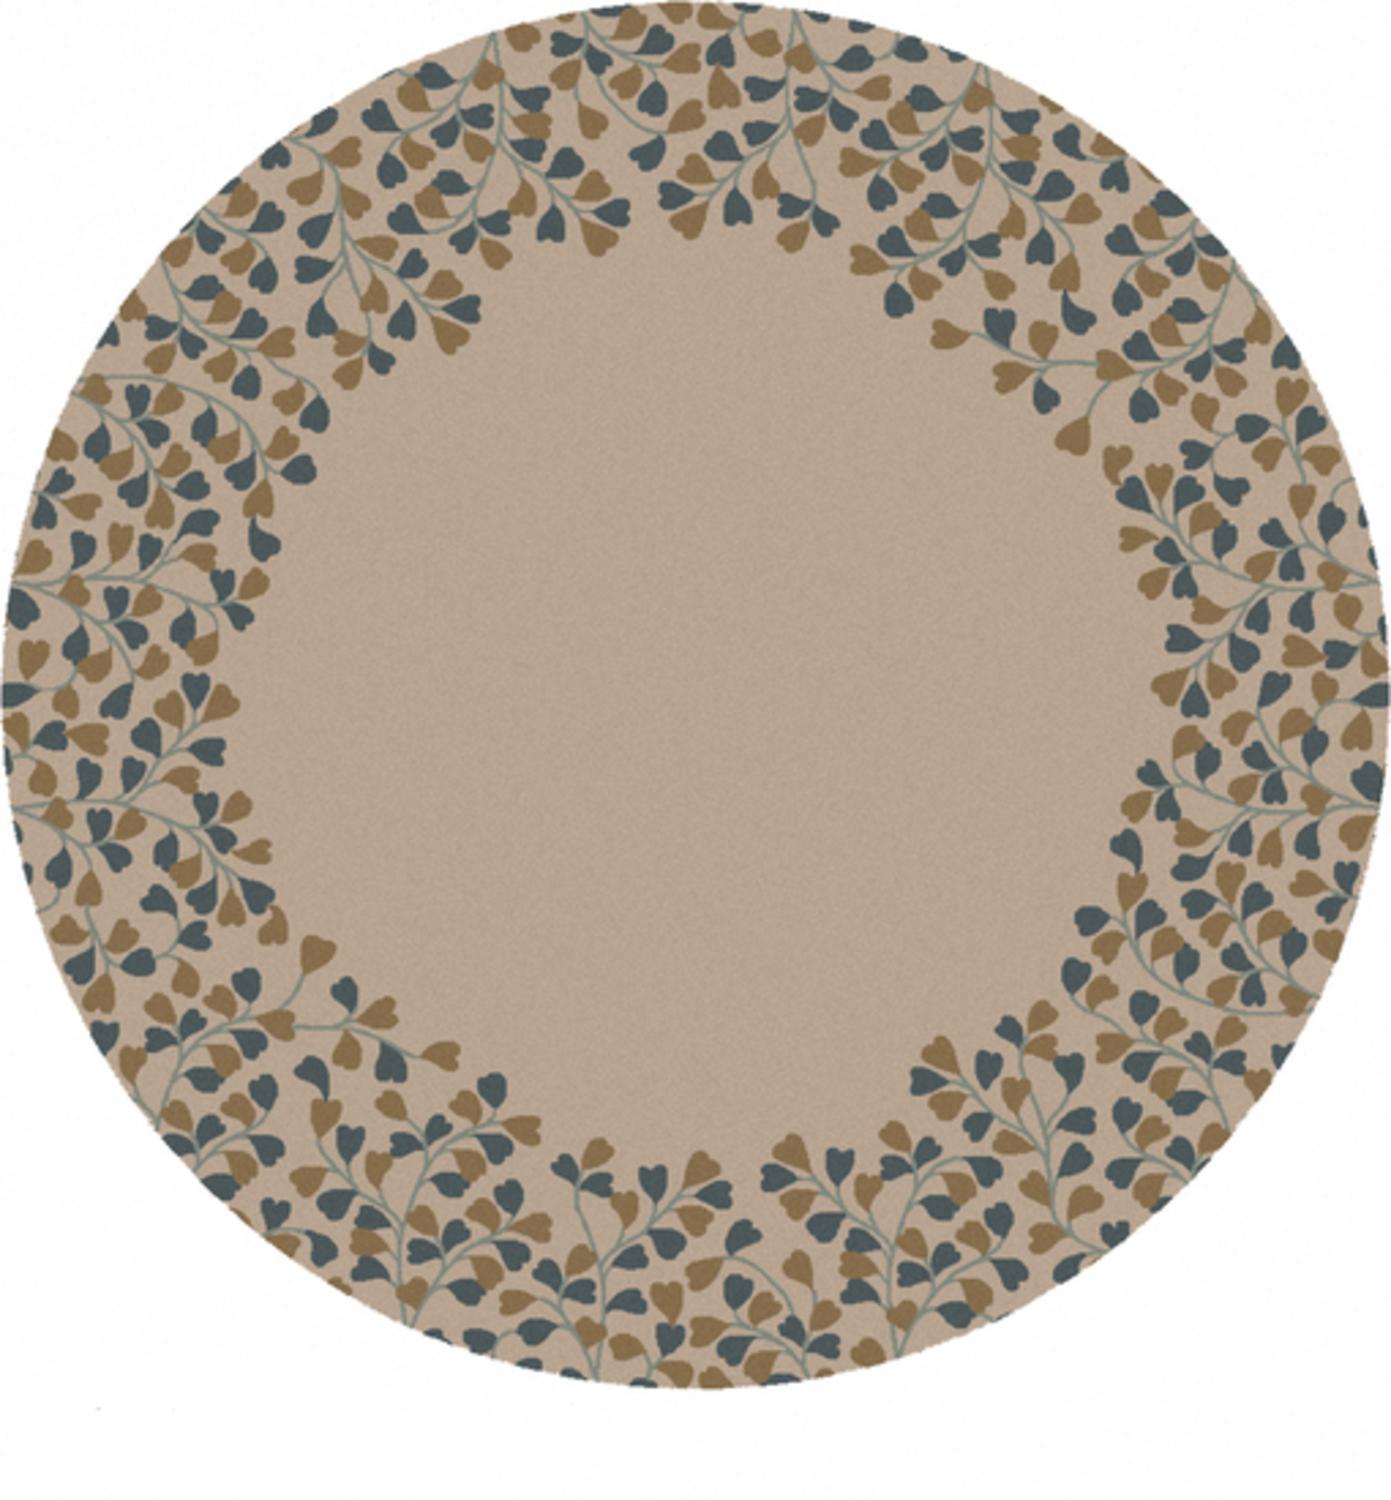 Diva At Home 8' Acampe Brown and Wheat Round Hand Tufted Wool Area Throw Rug